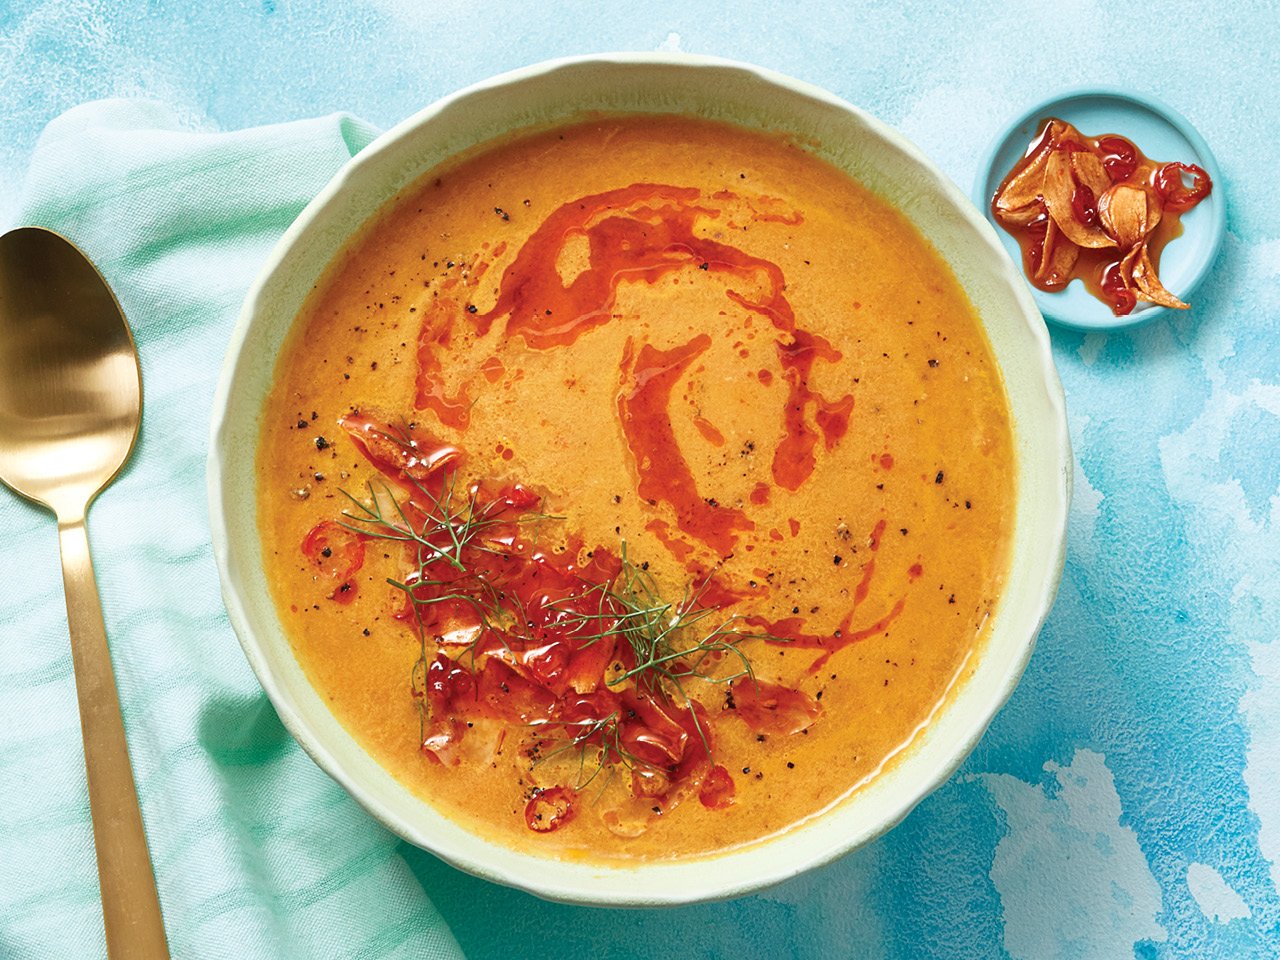 Carrot fennel soup with garlic chili oil on top in a light green bowl and a cloud printed background and along with a spoon.